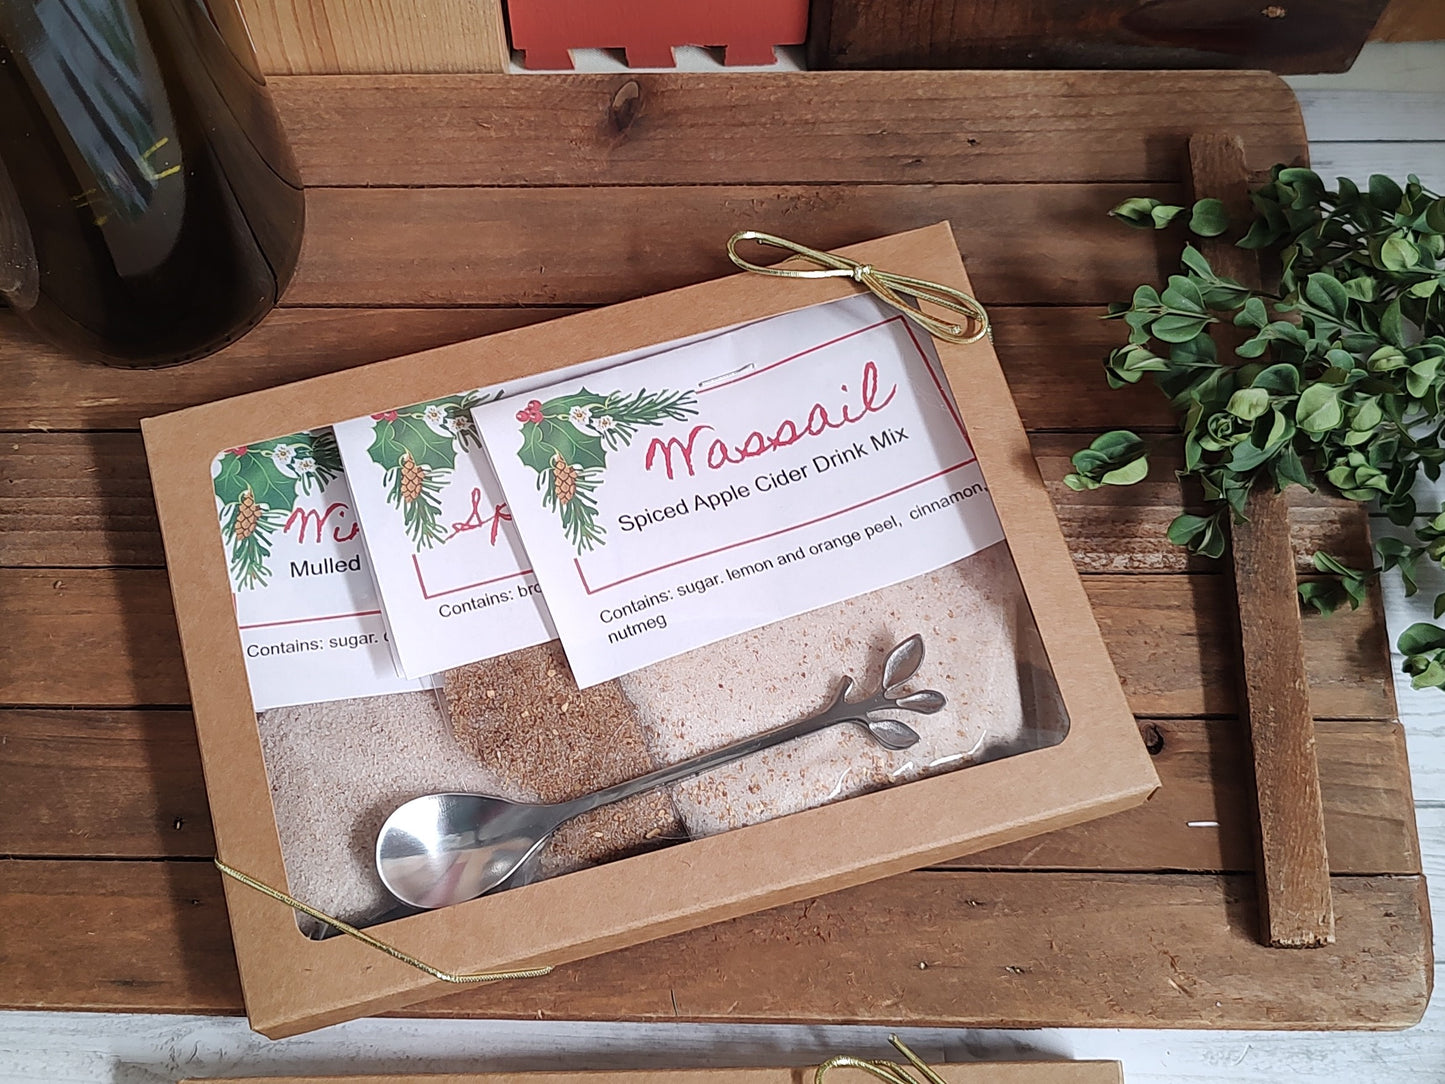 Gift Set of Hot Spiced Cider and Wine Blends, makes hot cider and wine into a treat